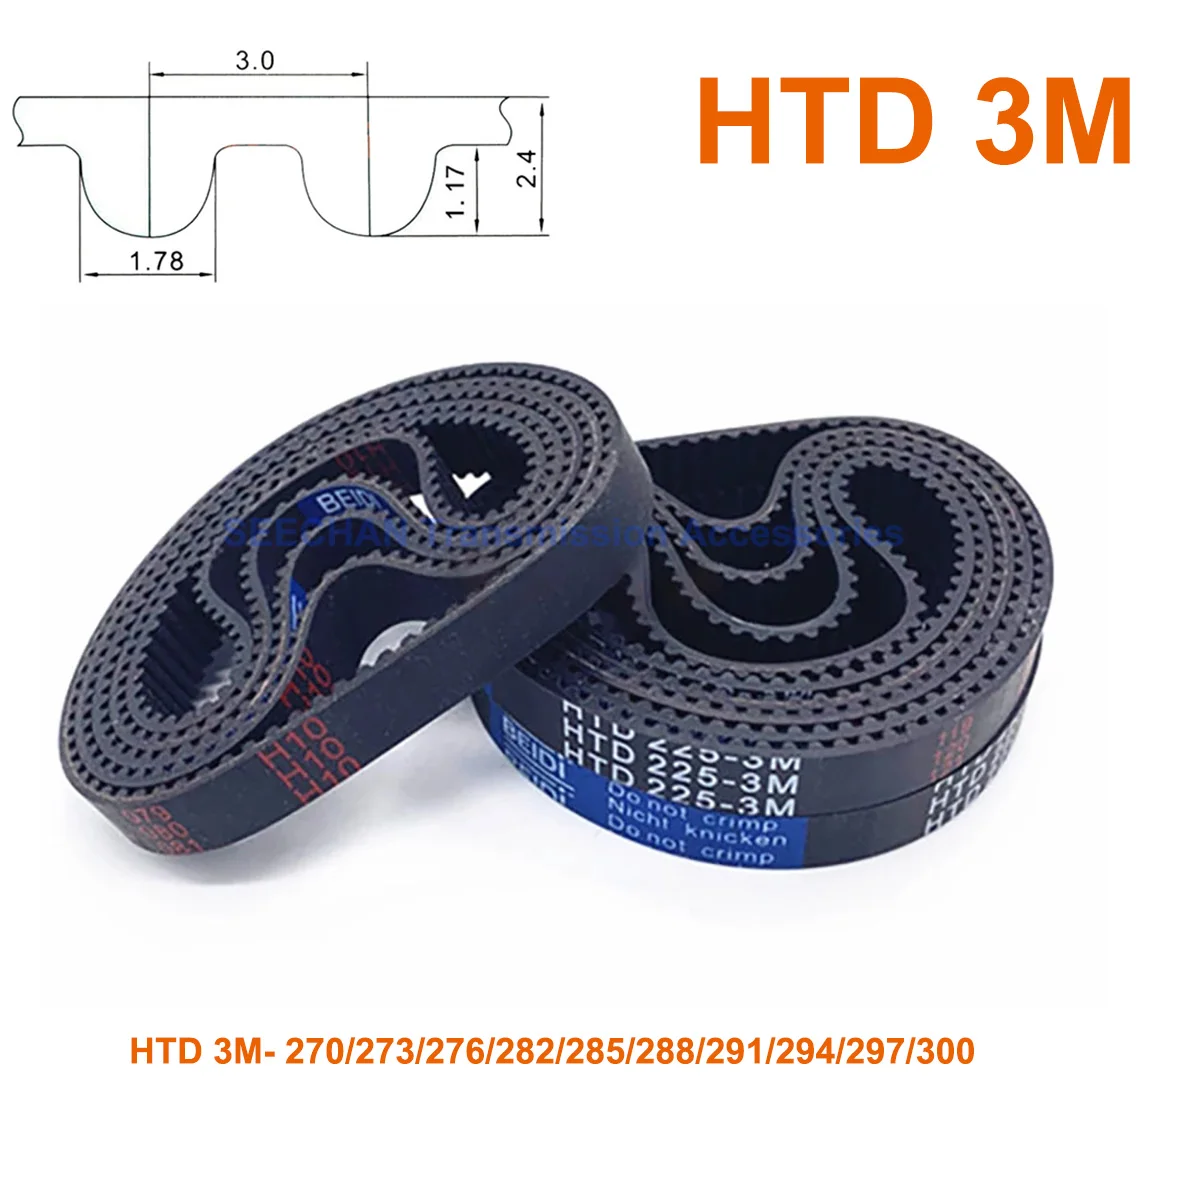 

Closed Loop HTD 3M Rubber Synchronous Timing Belt Width 6 10 15 20mm Perimeter 270 273 276 279 282 285 288 291 294 297 300mm